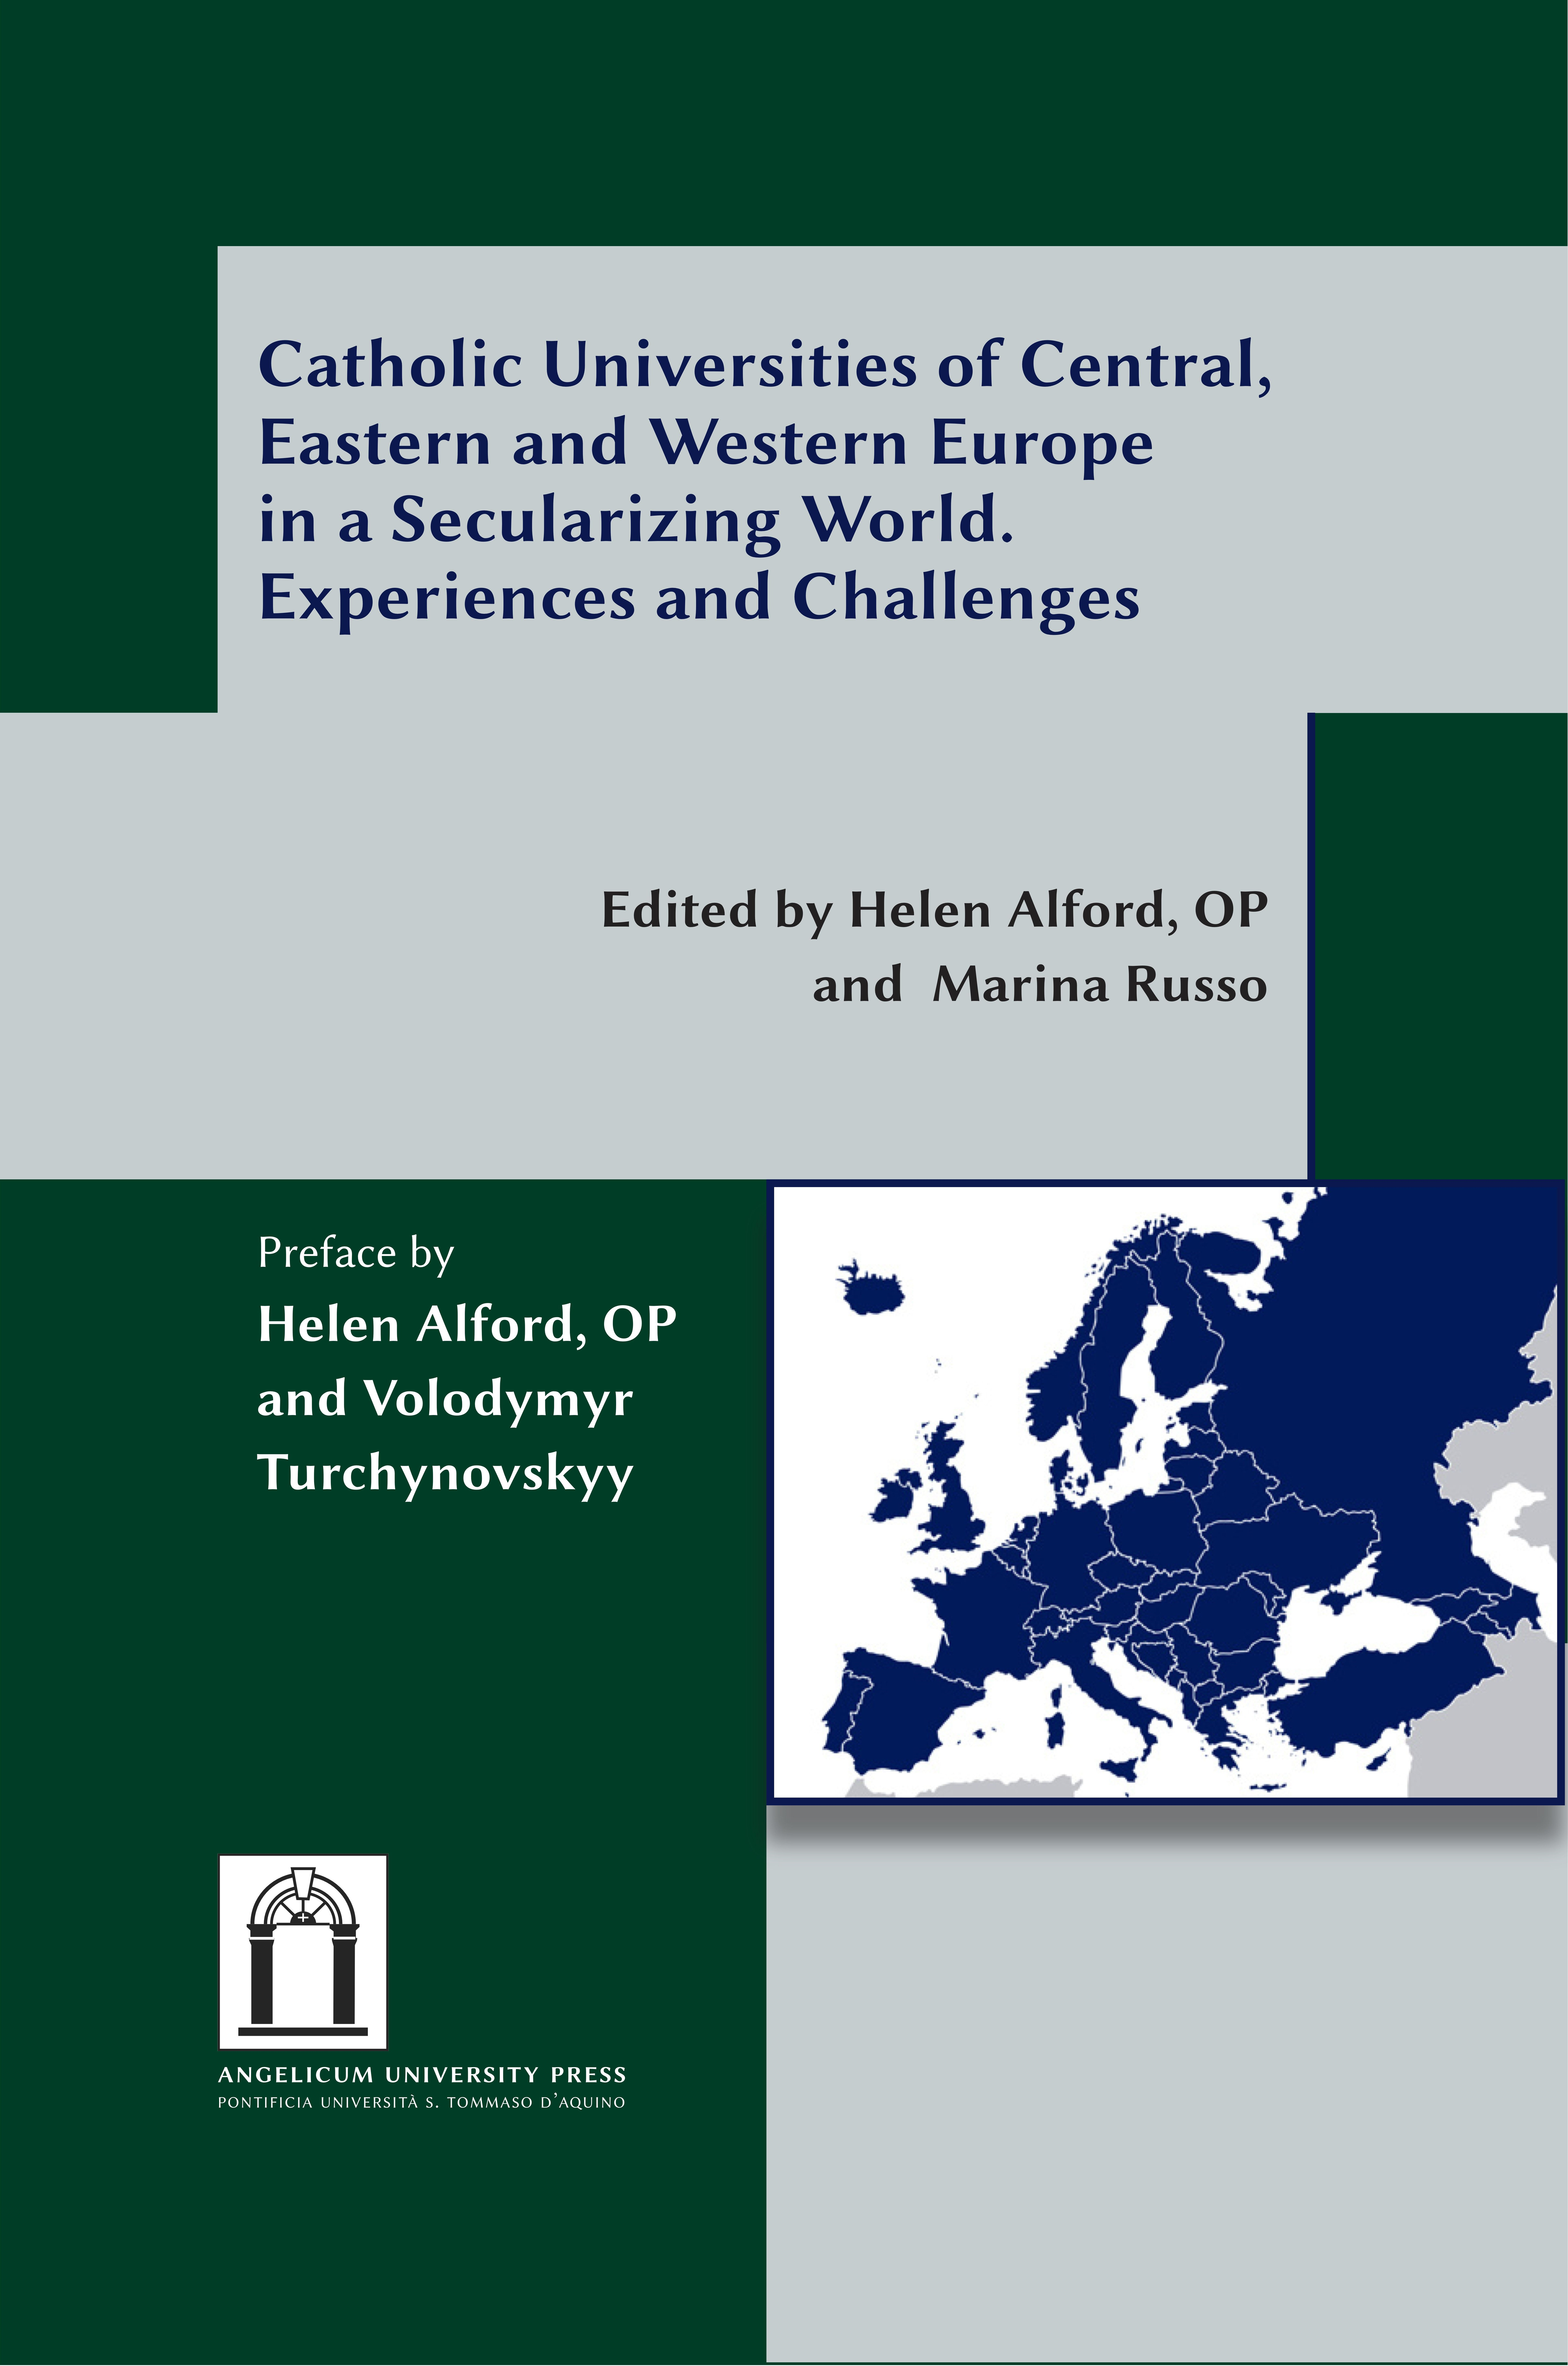 Catholic Universities of Central, Eastern and Western Europe in a Secularizing World book cover